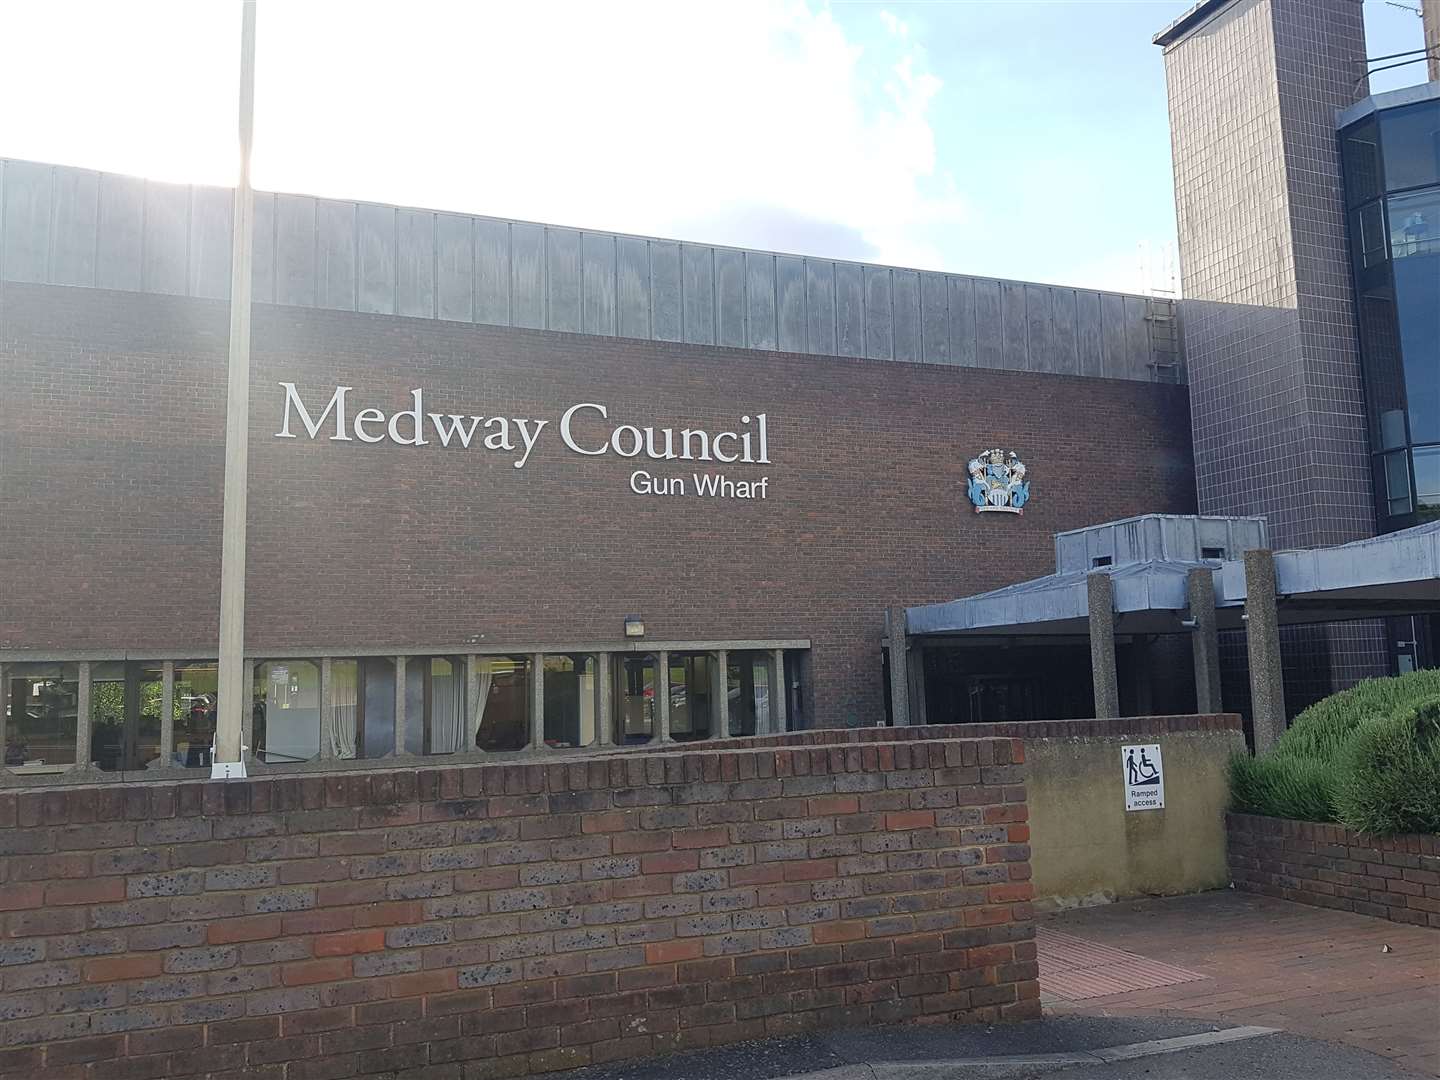 Gun Wharf is the home of Medway Council